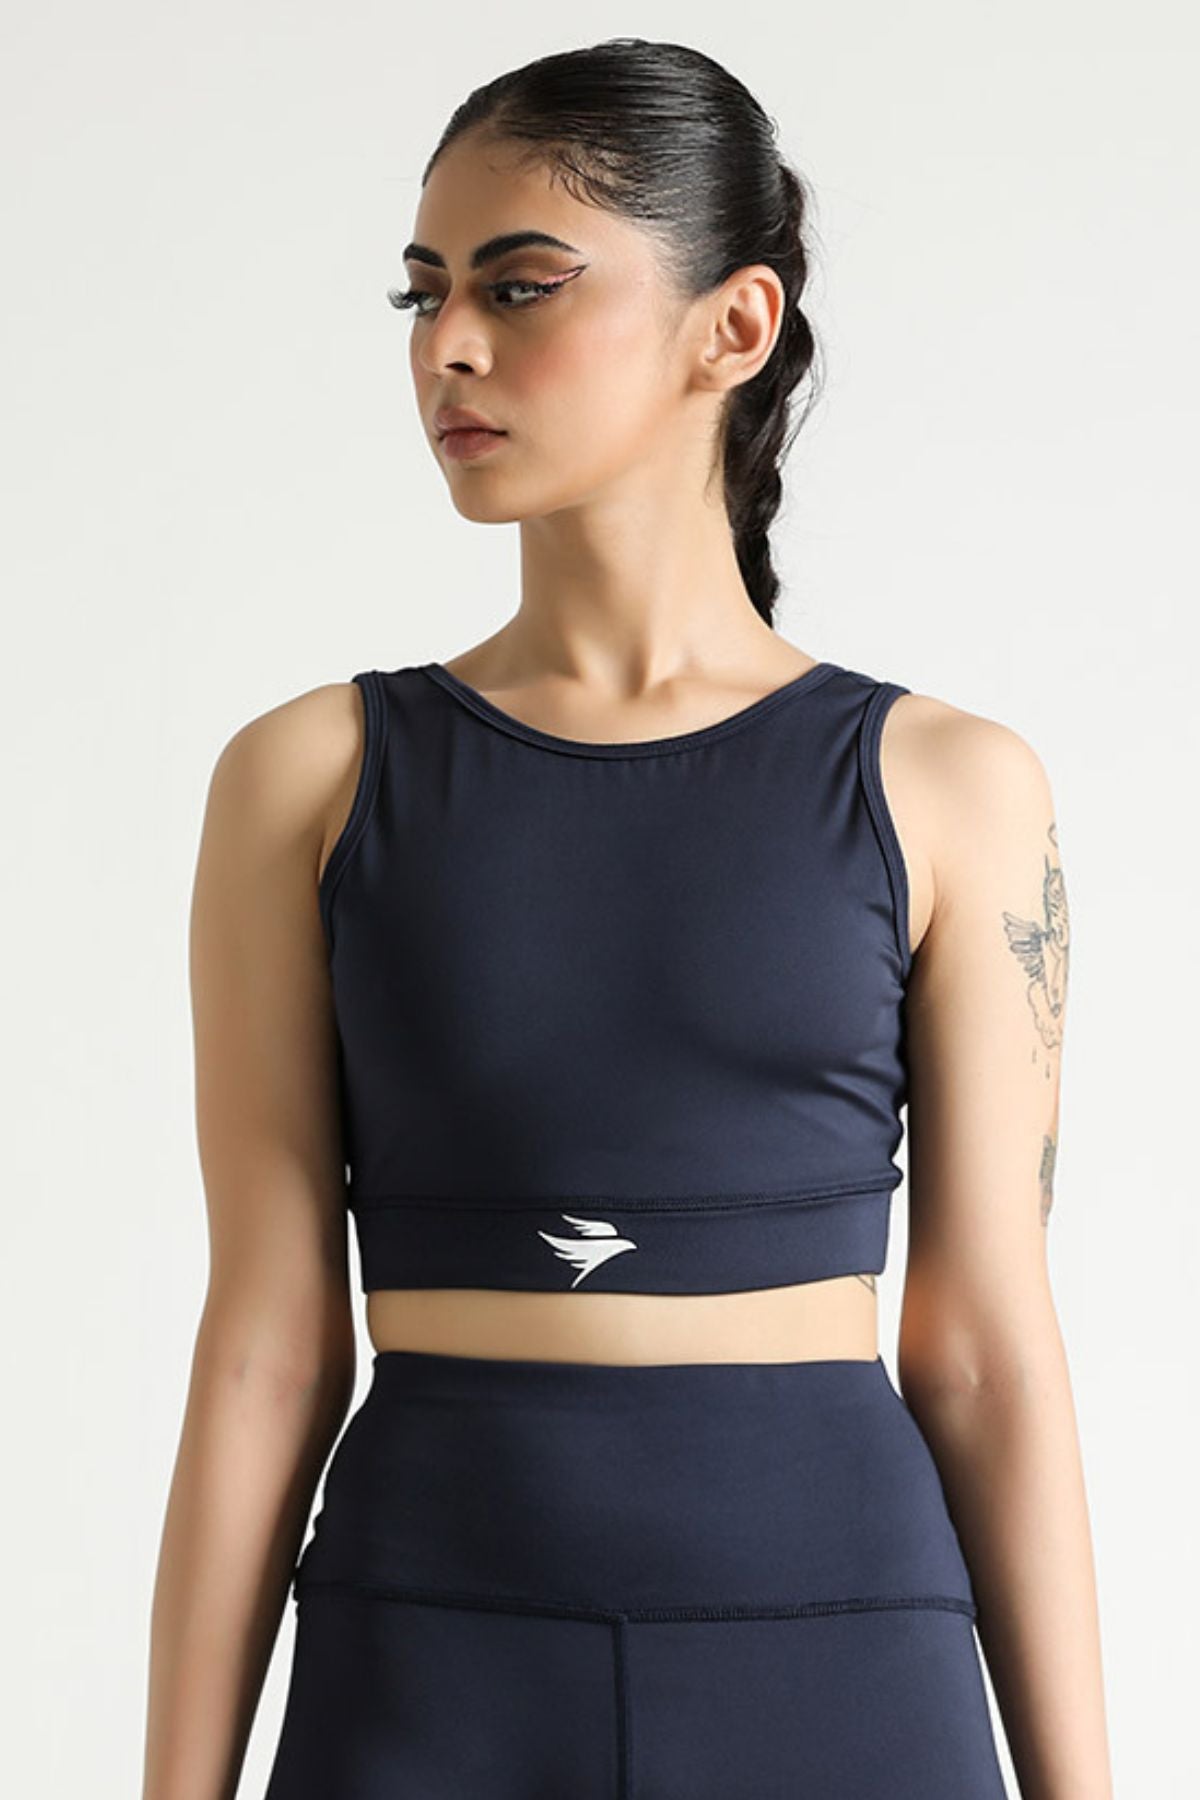 LUNA HURRICANE LOW BACK CROP TOP - The Orion Fit